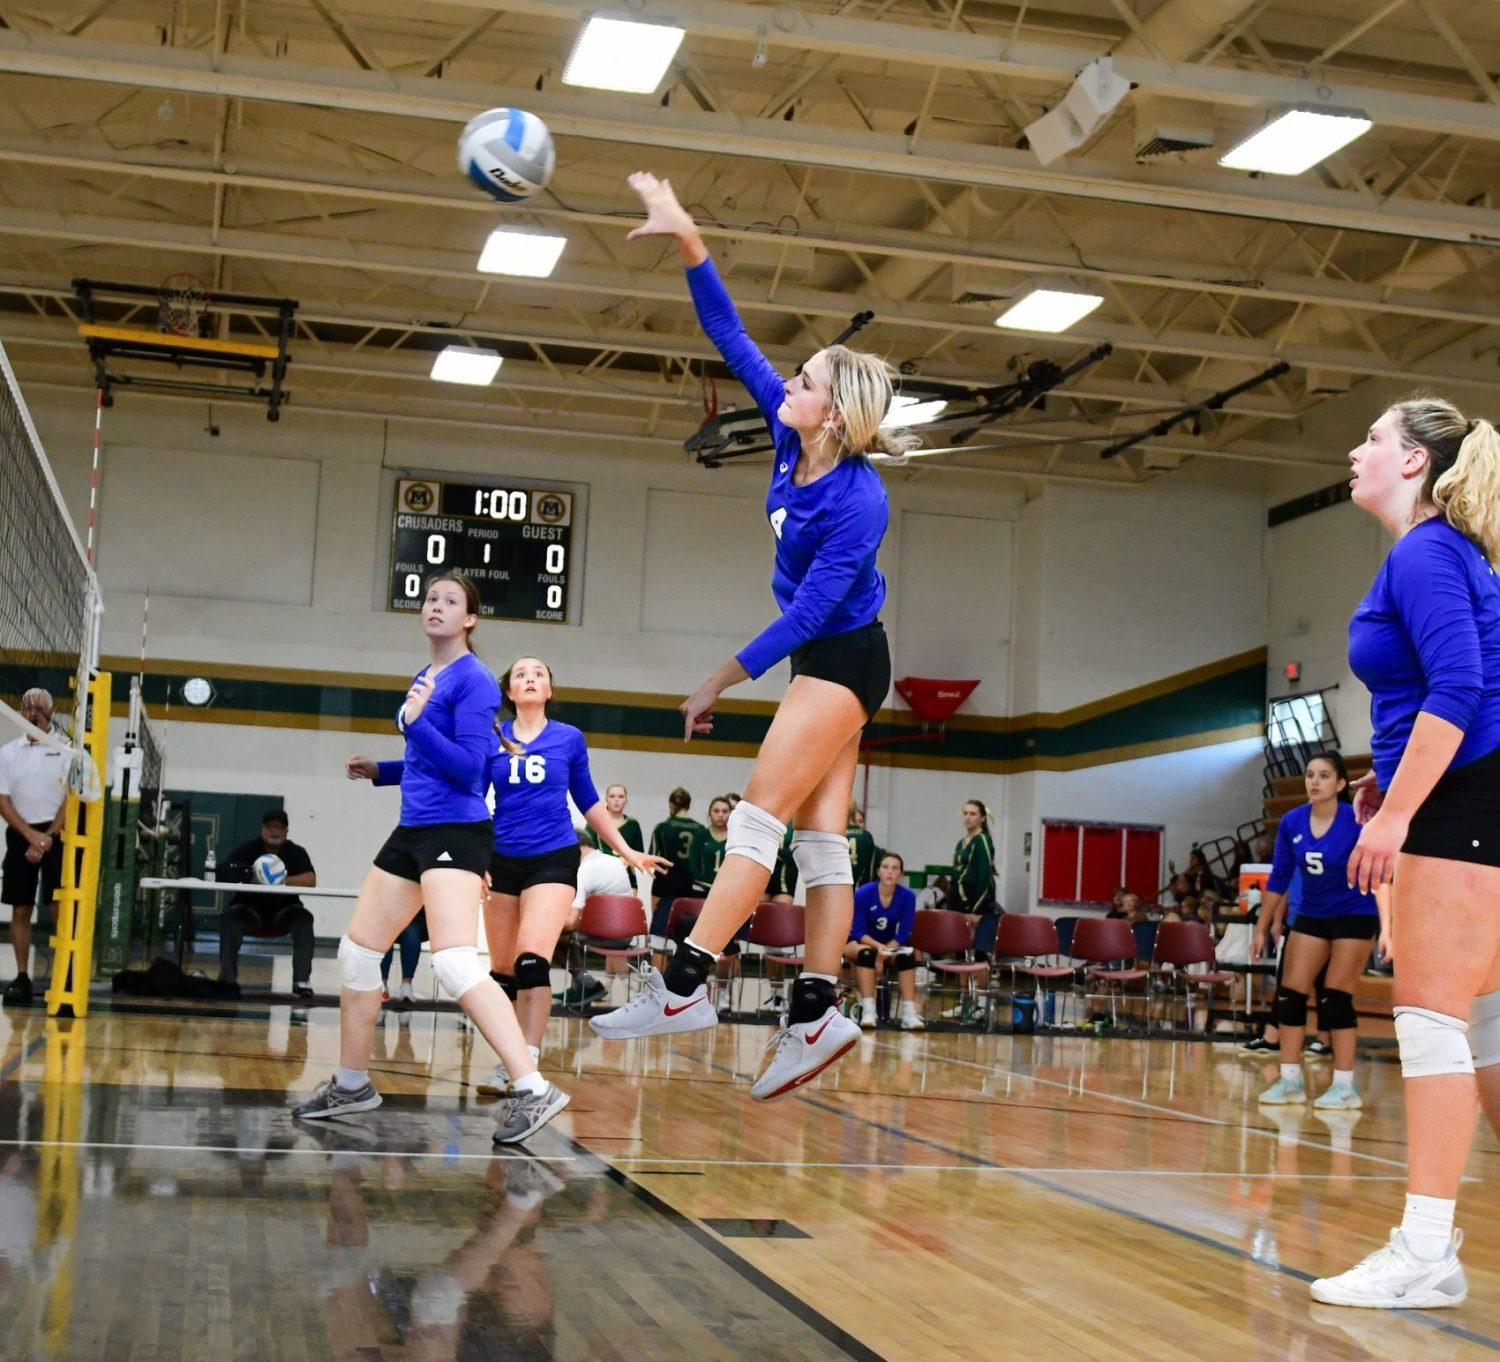 Dykman, Tyler lead Calvary Christian to volleyball win over Big Rapids Crossroads Academy